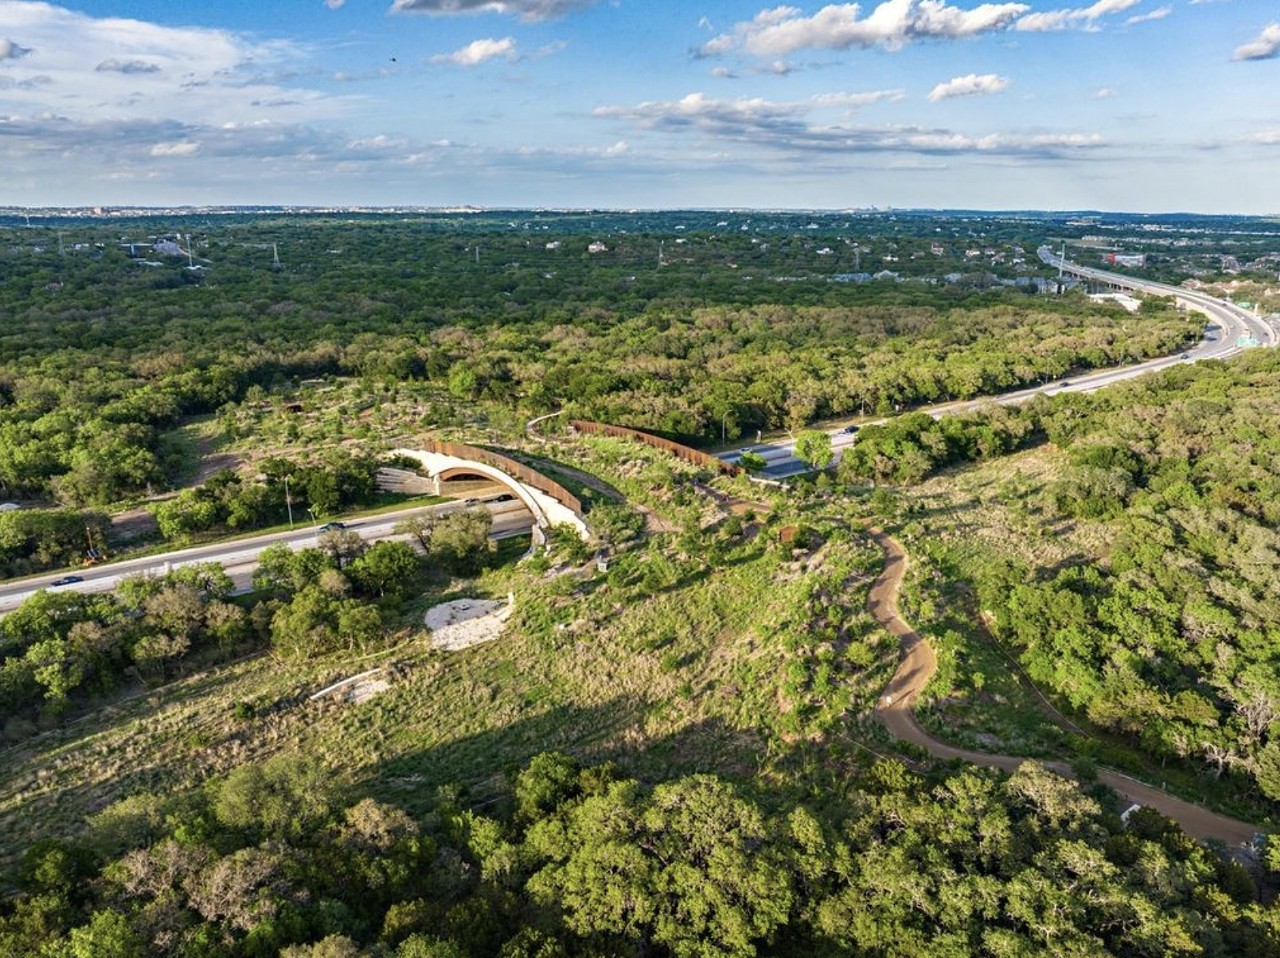 Phil Hardberger Park Land Bridge  
8400 N.W. Military Highway or 13203 Blanco Road, (210) 207-7275, sanantonio.gov 
The 150-foot long land bridge connecting Phil Hardberger Park from east to west opened December 2020 and is the first in the world designed for safe passage for both people and wildlife. Deer, raccoons, coyotes and humans can stroll across what is deemed the largest wildlife crossing in the U.S. to date. The land bridge can be reached via the park’s Northwest Military or Blanco Road entrances.